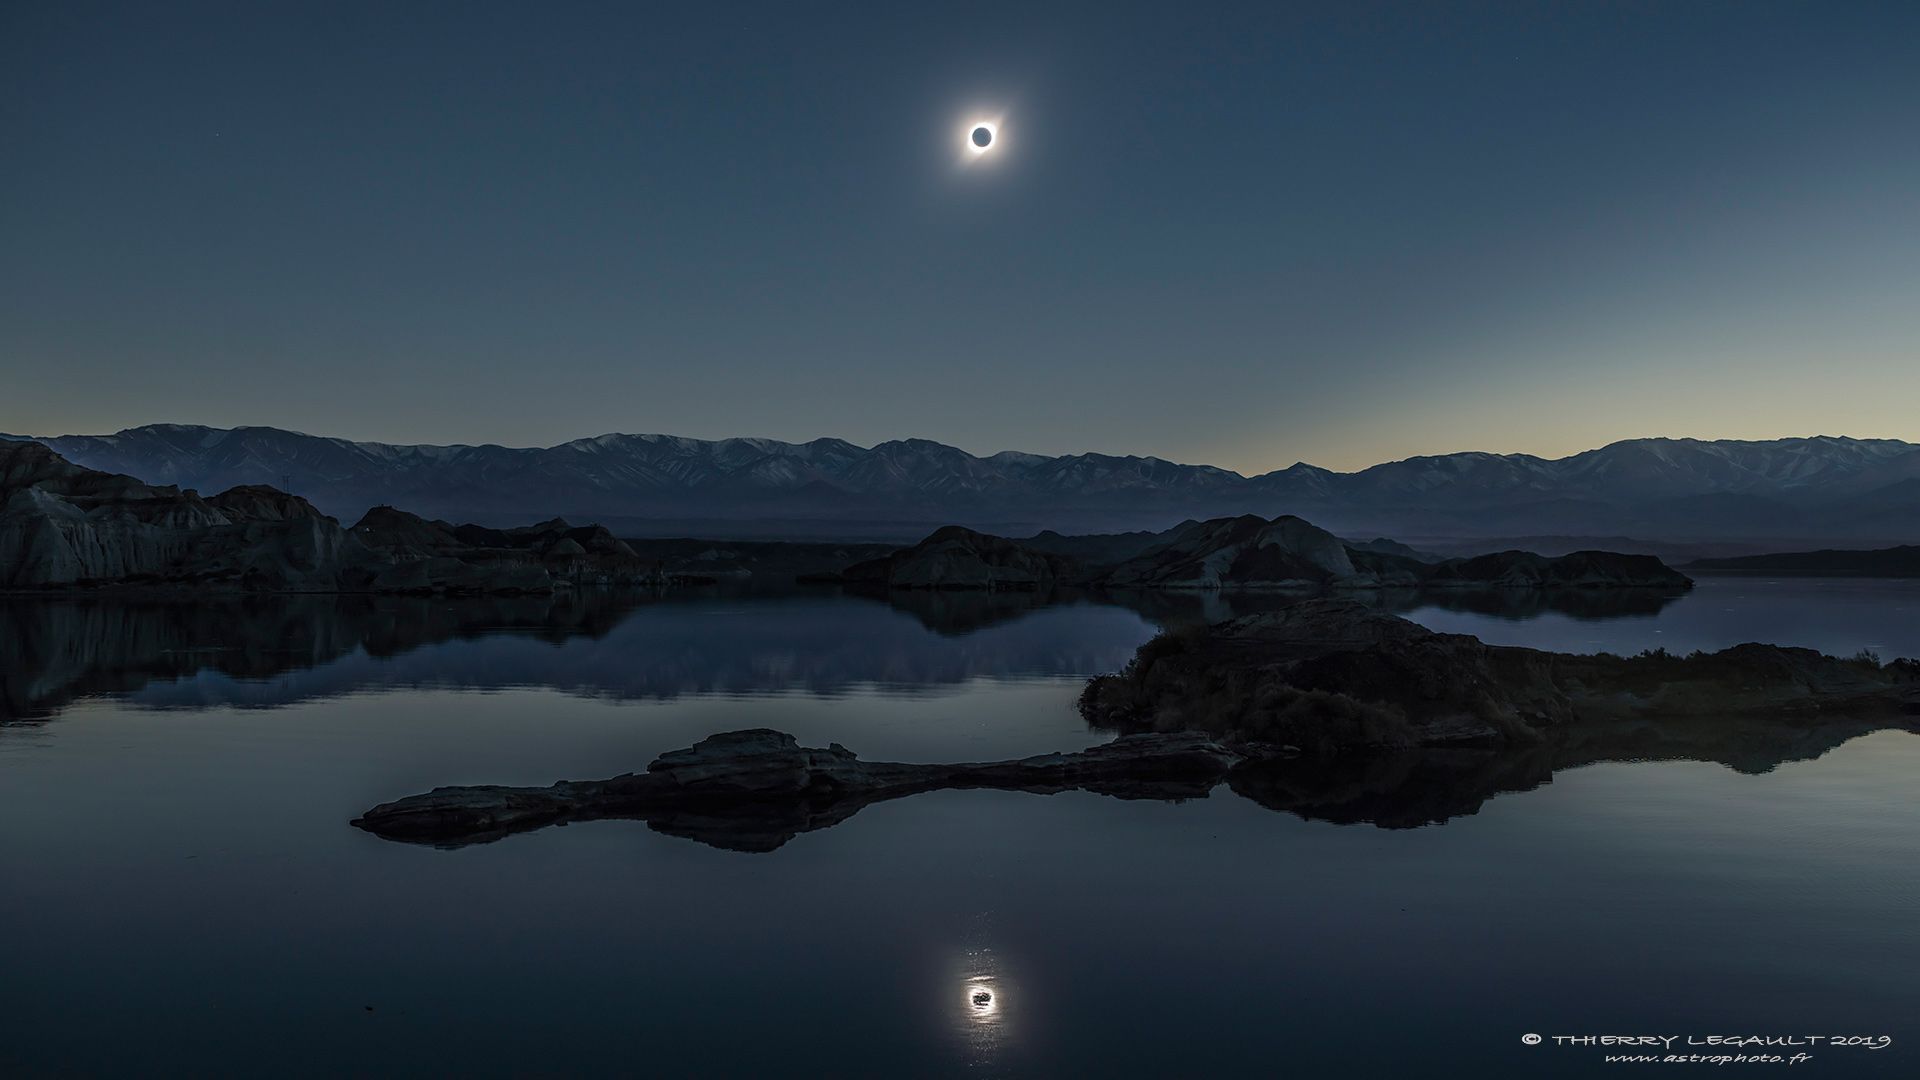 APOD: 2019 August 5 Total Solar Eclipse Reflected